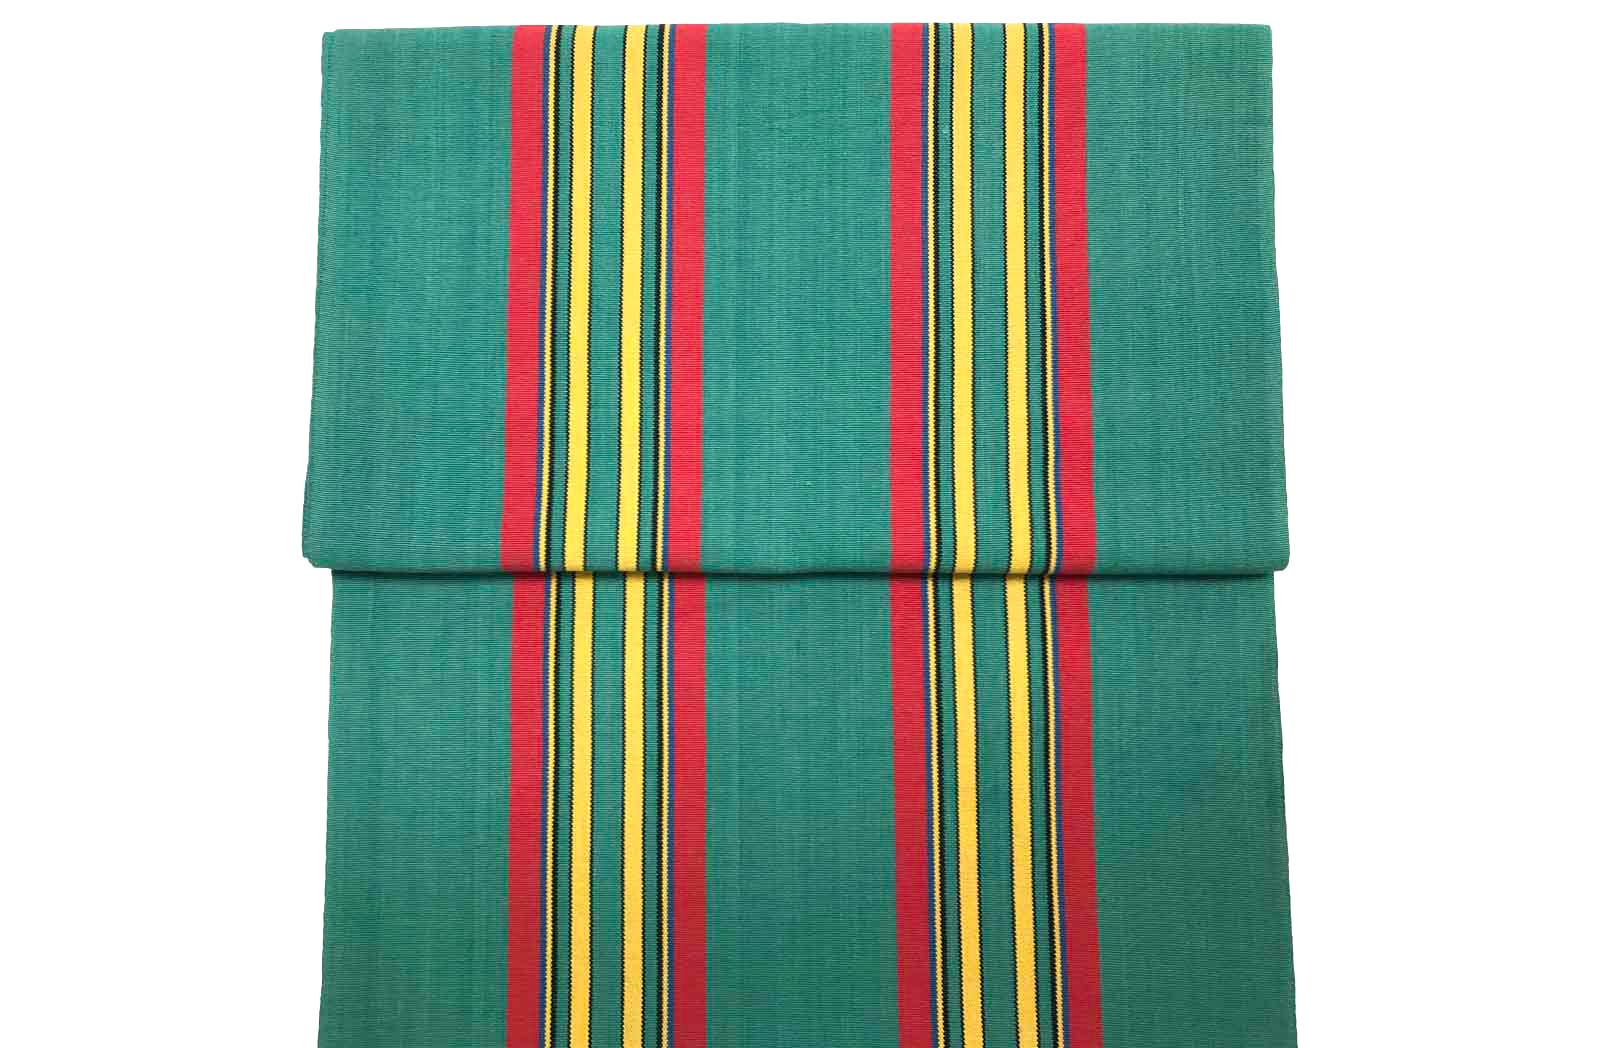 Replacement Deck Chair Slings Jade green, red, yellow stripe 